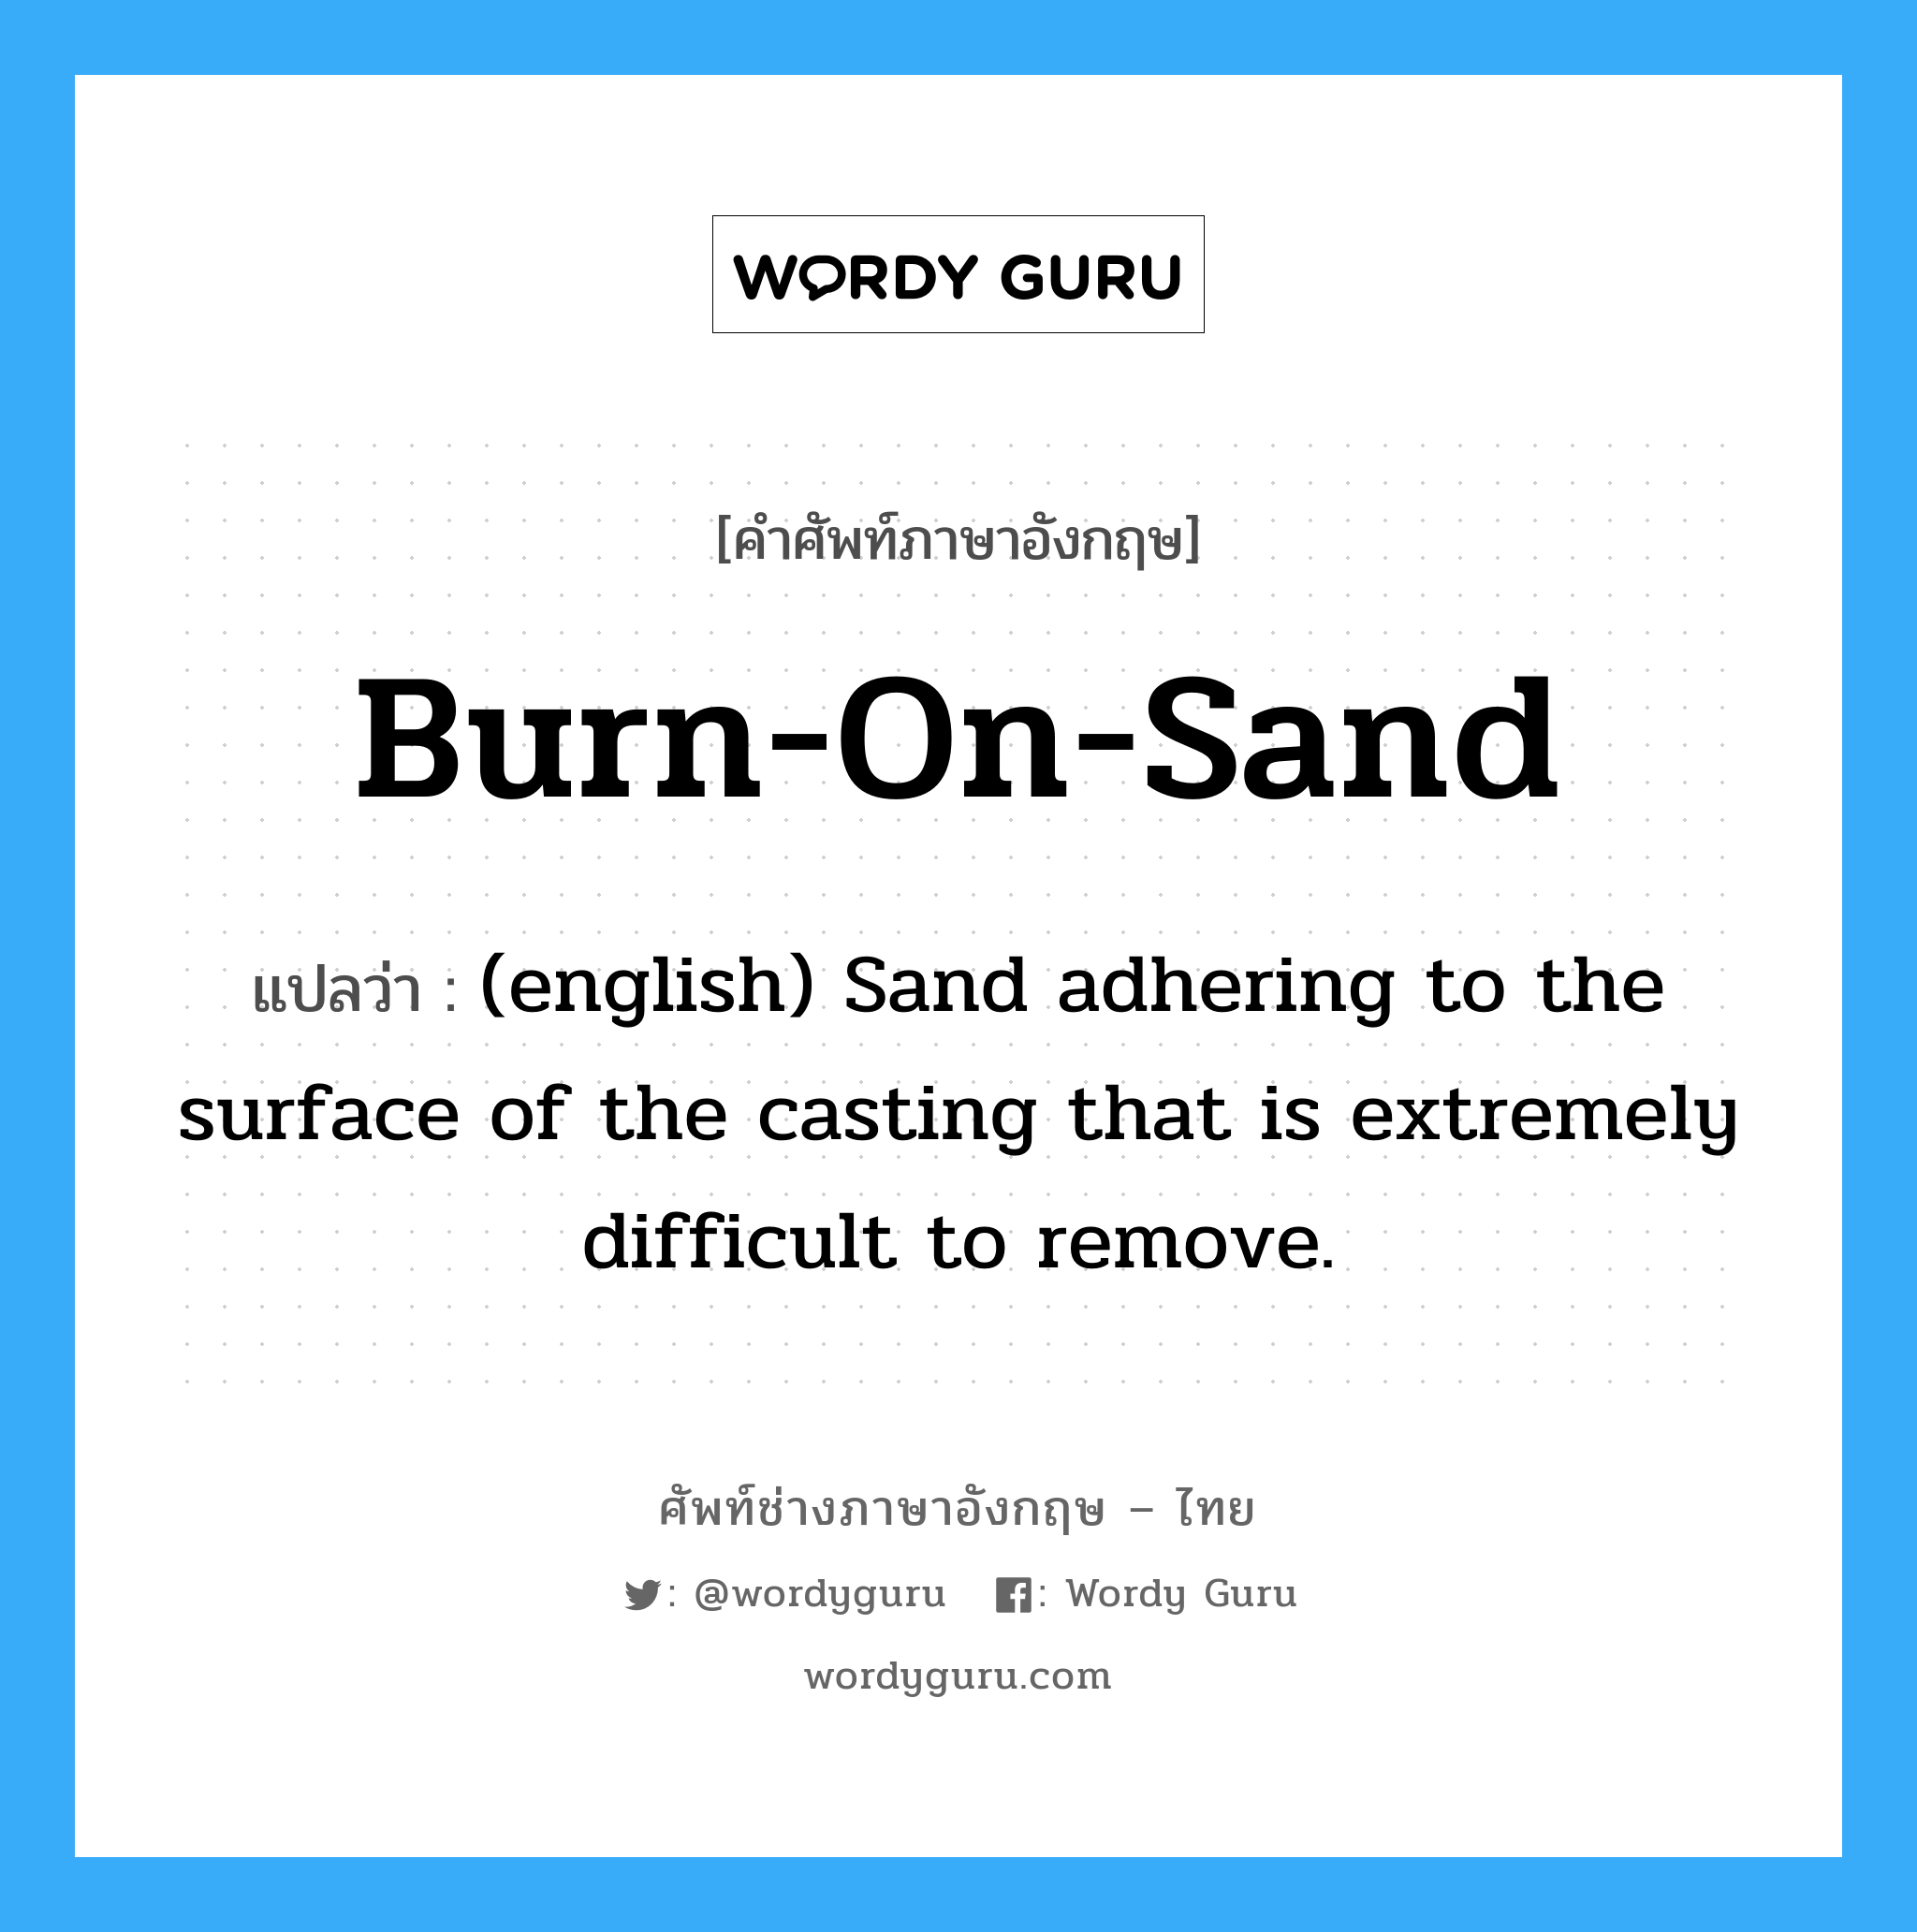 (english) Sand adhering to the surface of the casting that is extremely difficult to remove. ภาษาอังกฤษ?, คำศัพท์ช่างภาษาอังกฤษ - ไทย (english) Sand adhering to the surface of the casting that is extremely difficult to remove. คำศัพท์ภาษาอังกฤษ (english) Sand adhering to the surface of the casting that is extremely difficult to remove. แปลว่า Burn-On-Sand